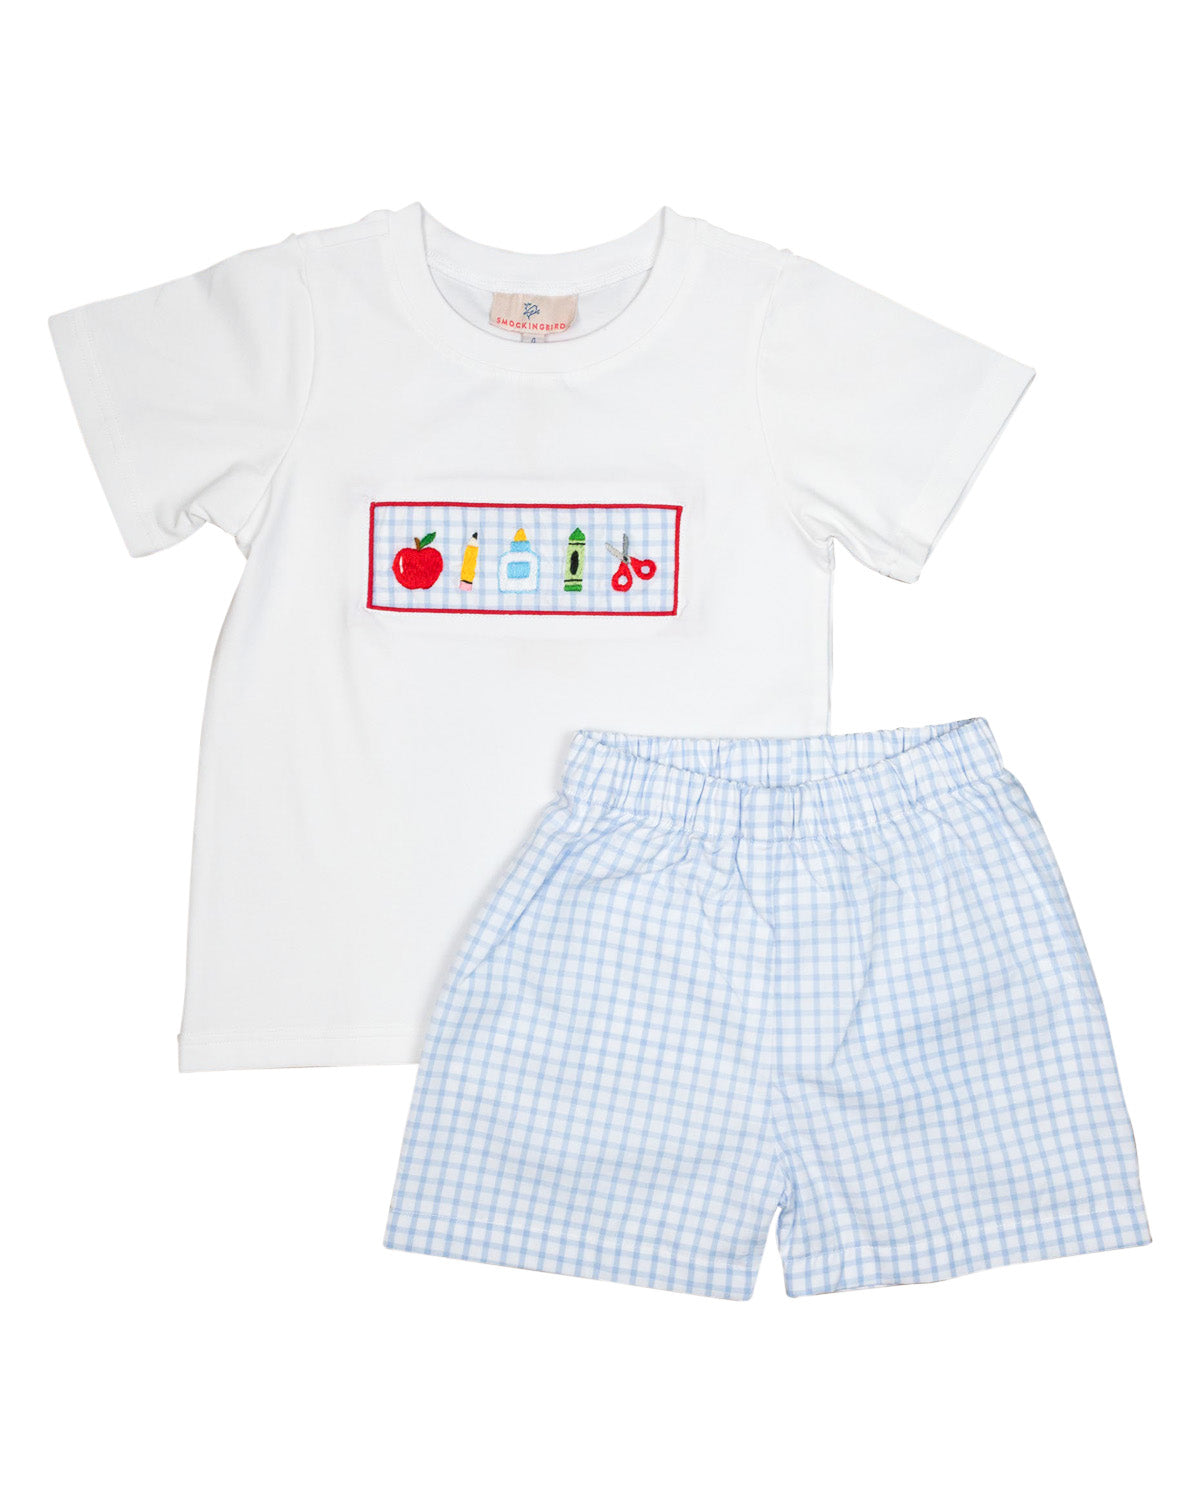 School Supplies Hand Embroidered Shorts Set- FINAL SALE